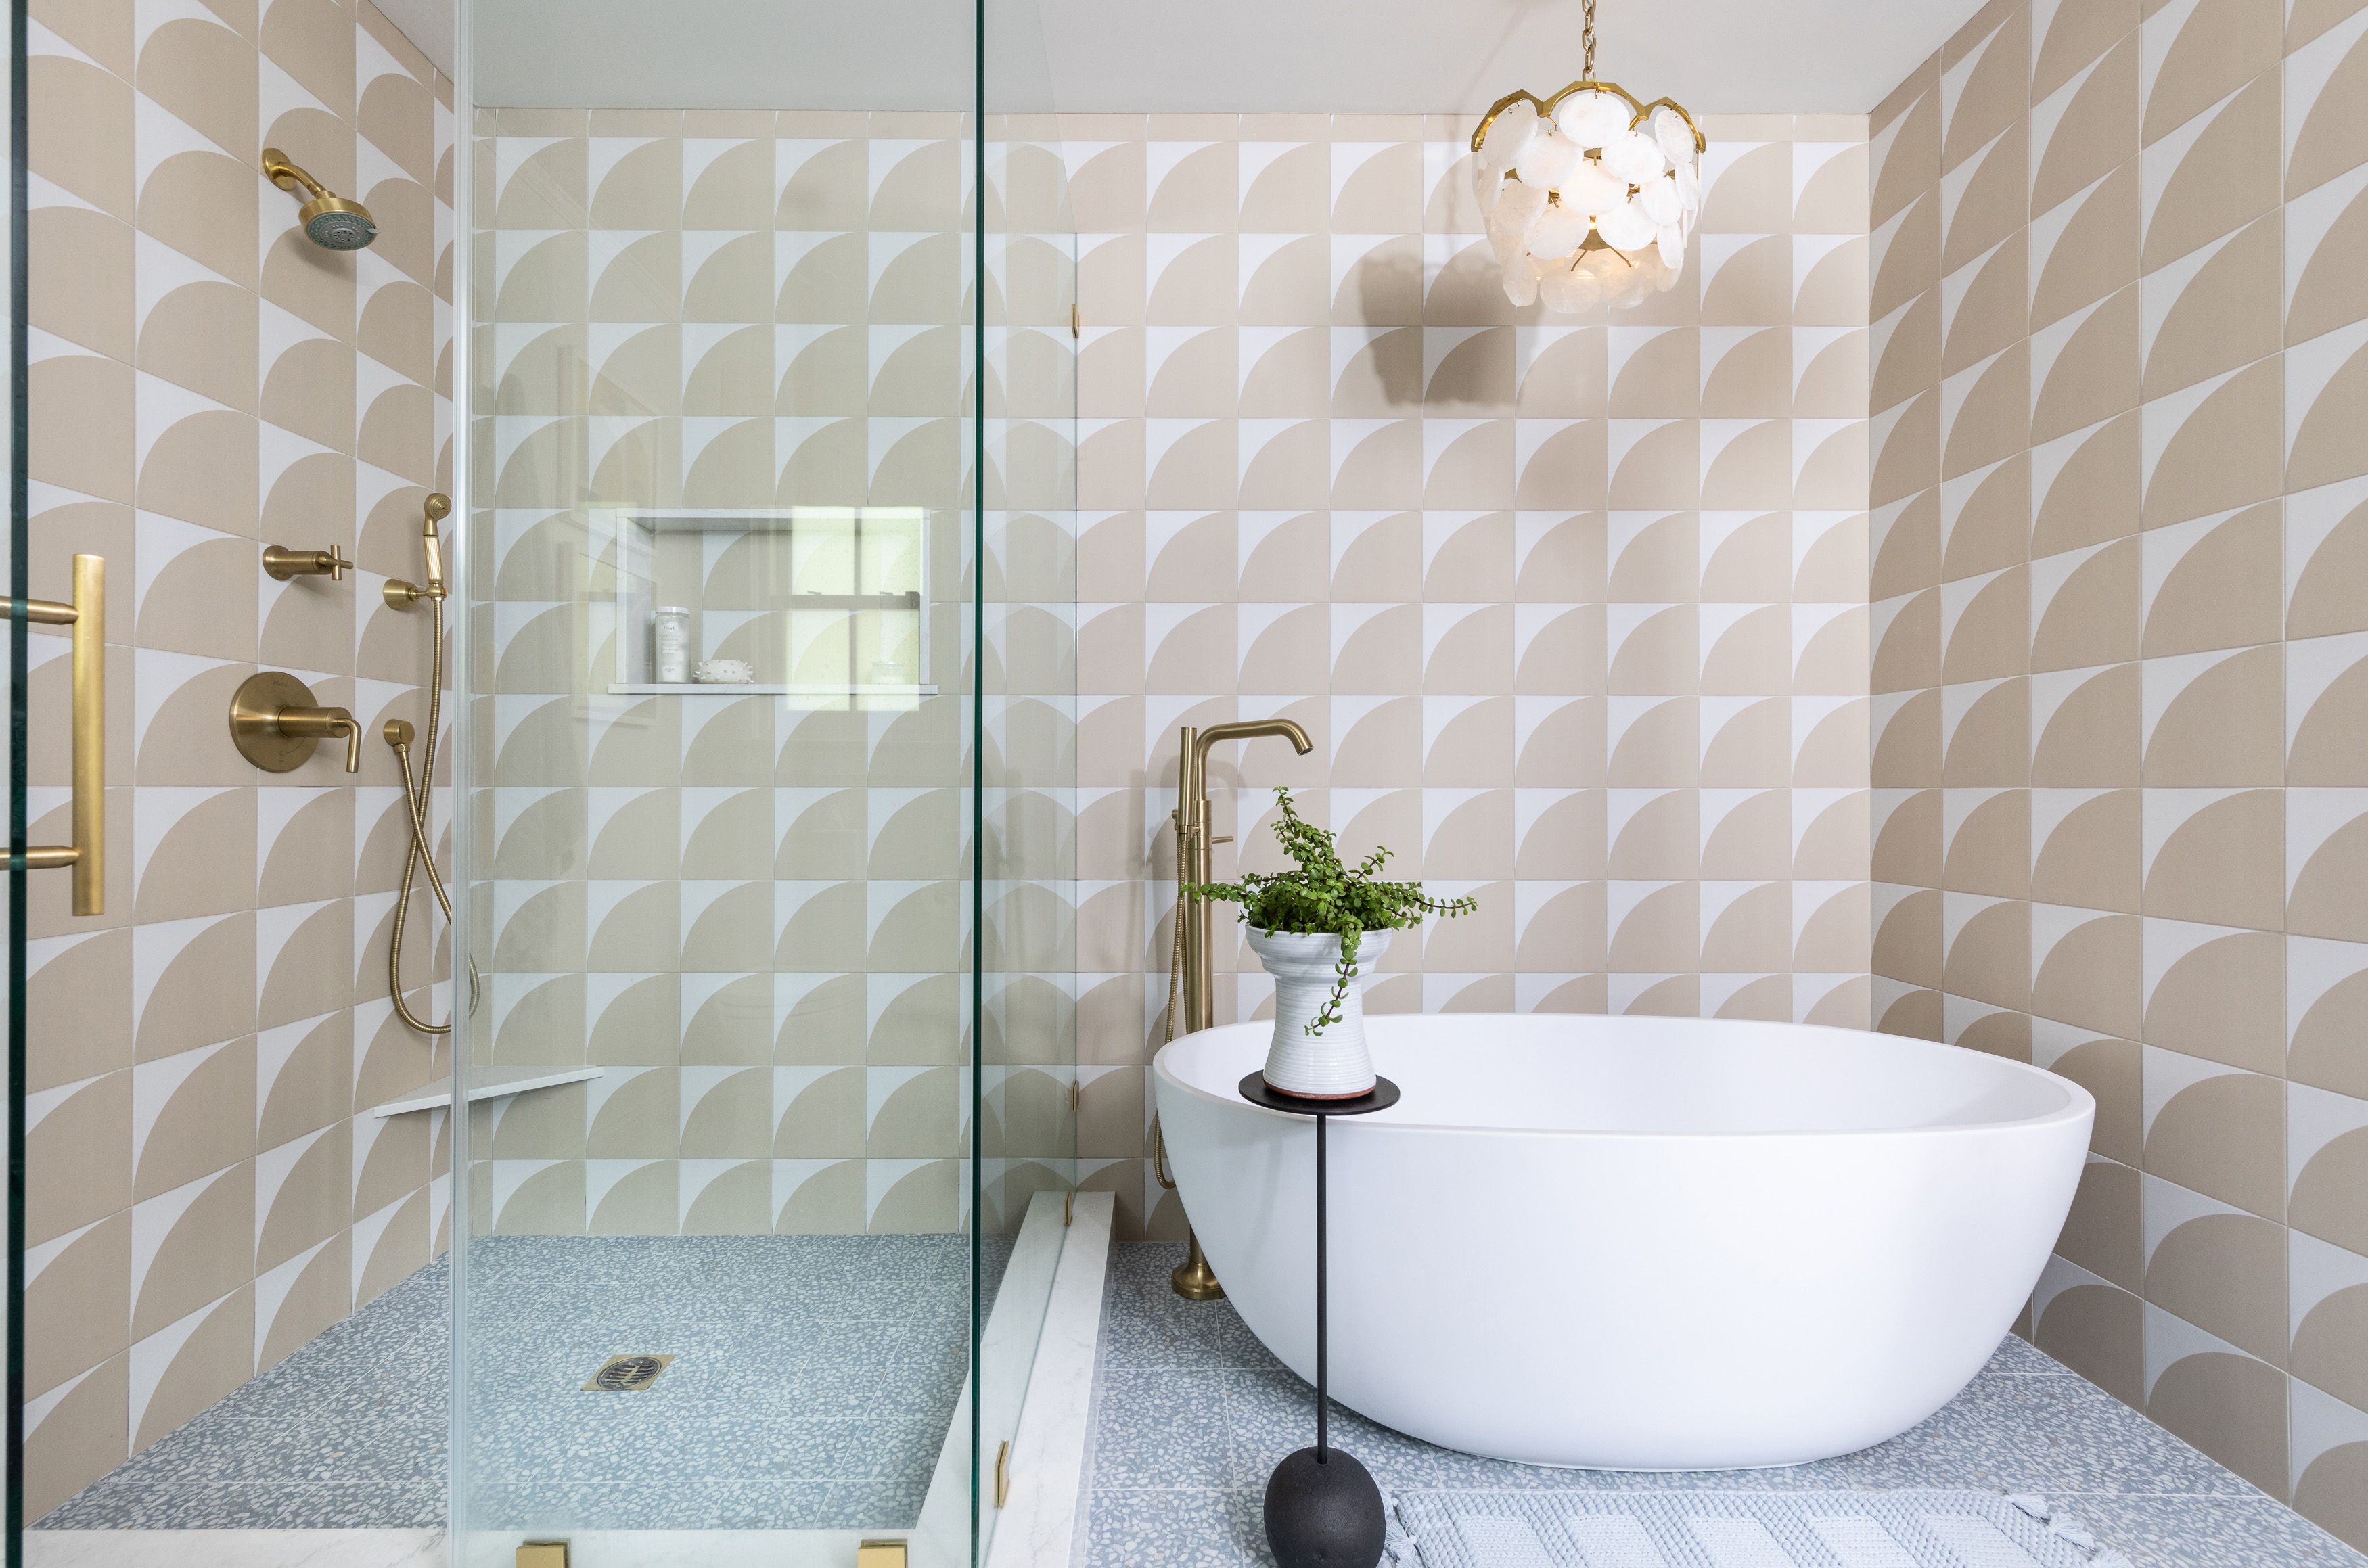 Bathroom Design: 5 Top Tips from the Pros